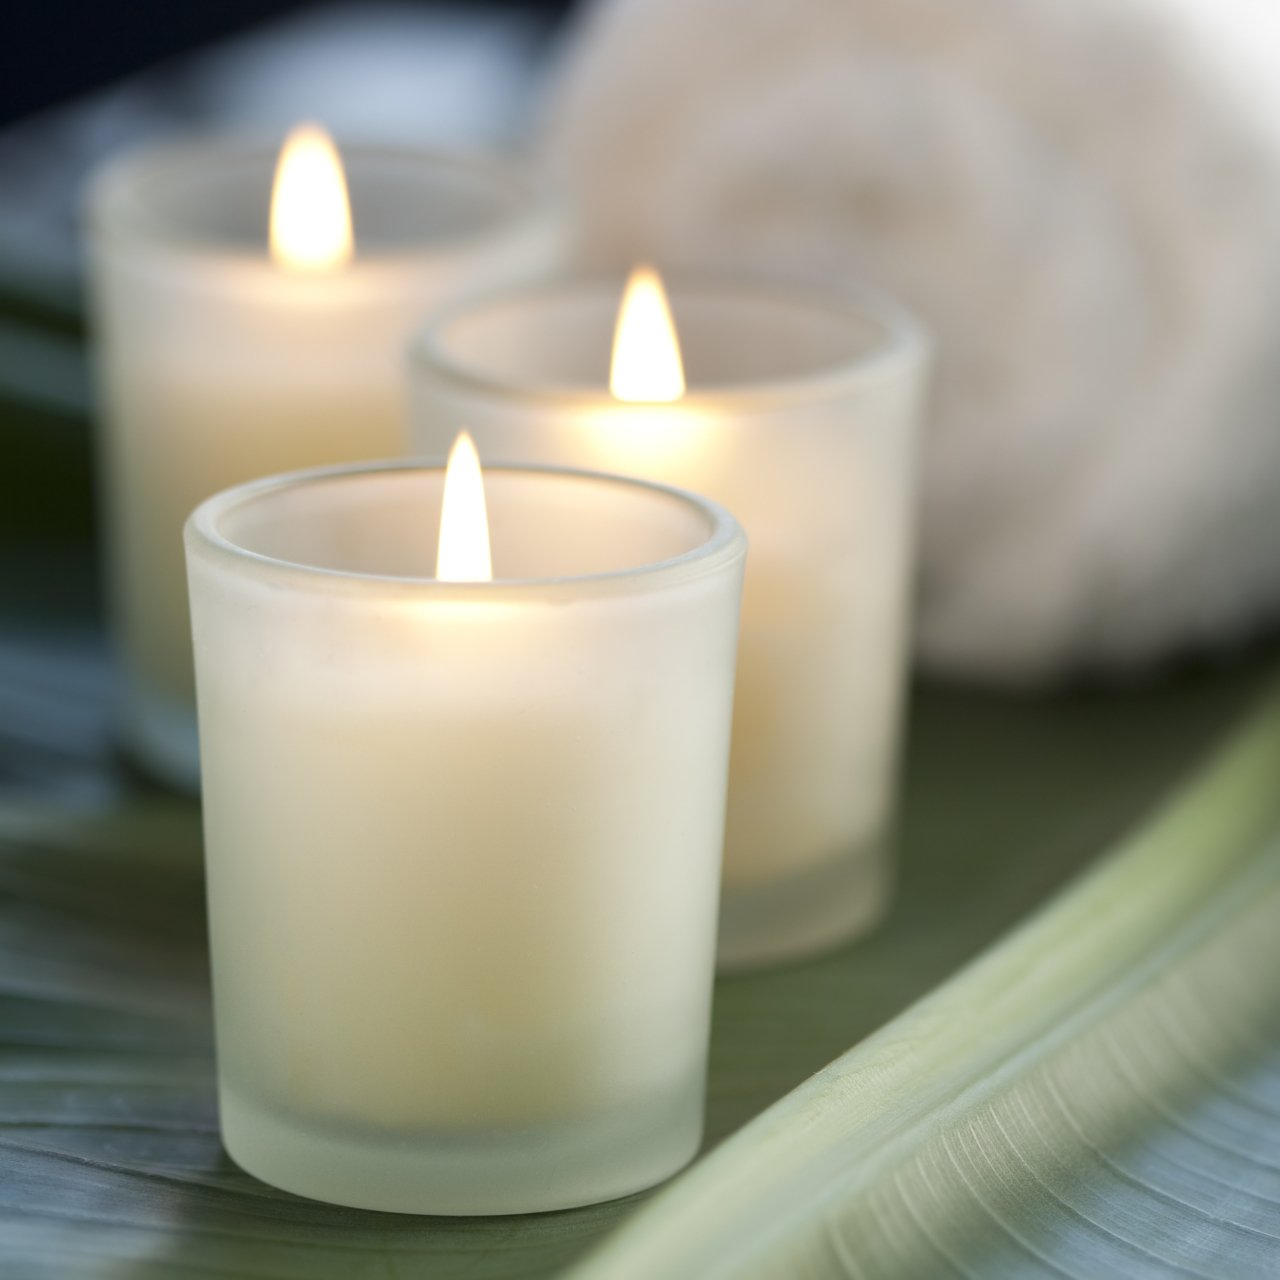 Three candles in spa setting, with banana leaf and white towels